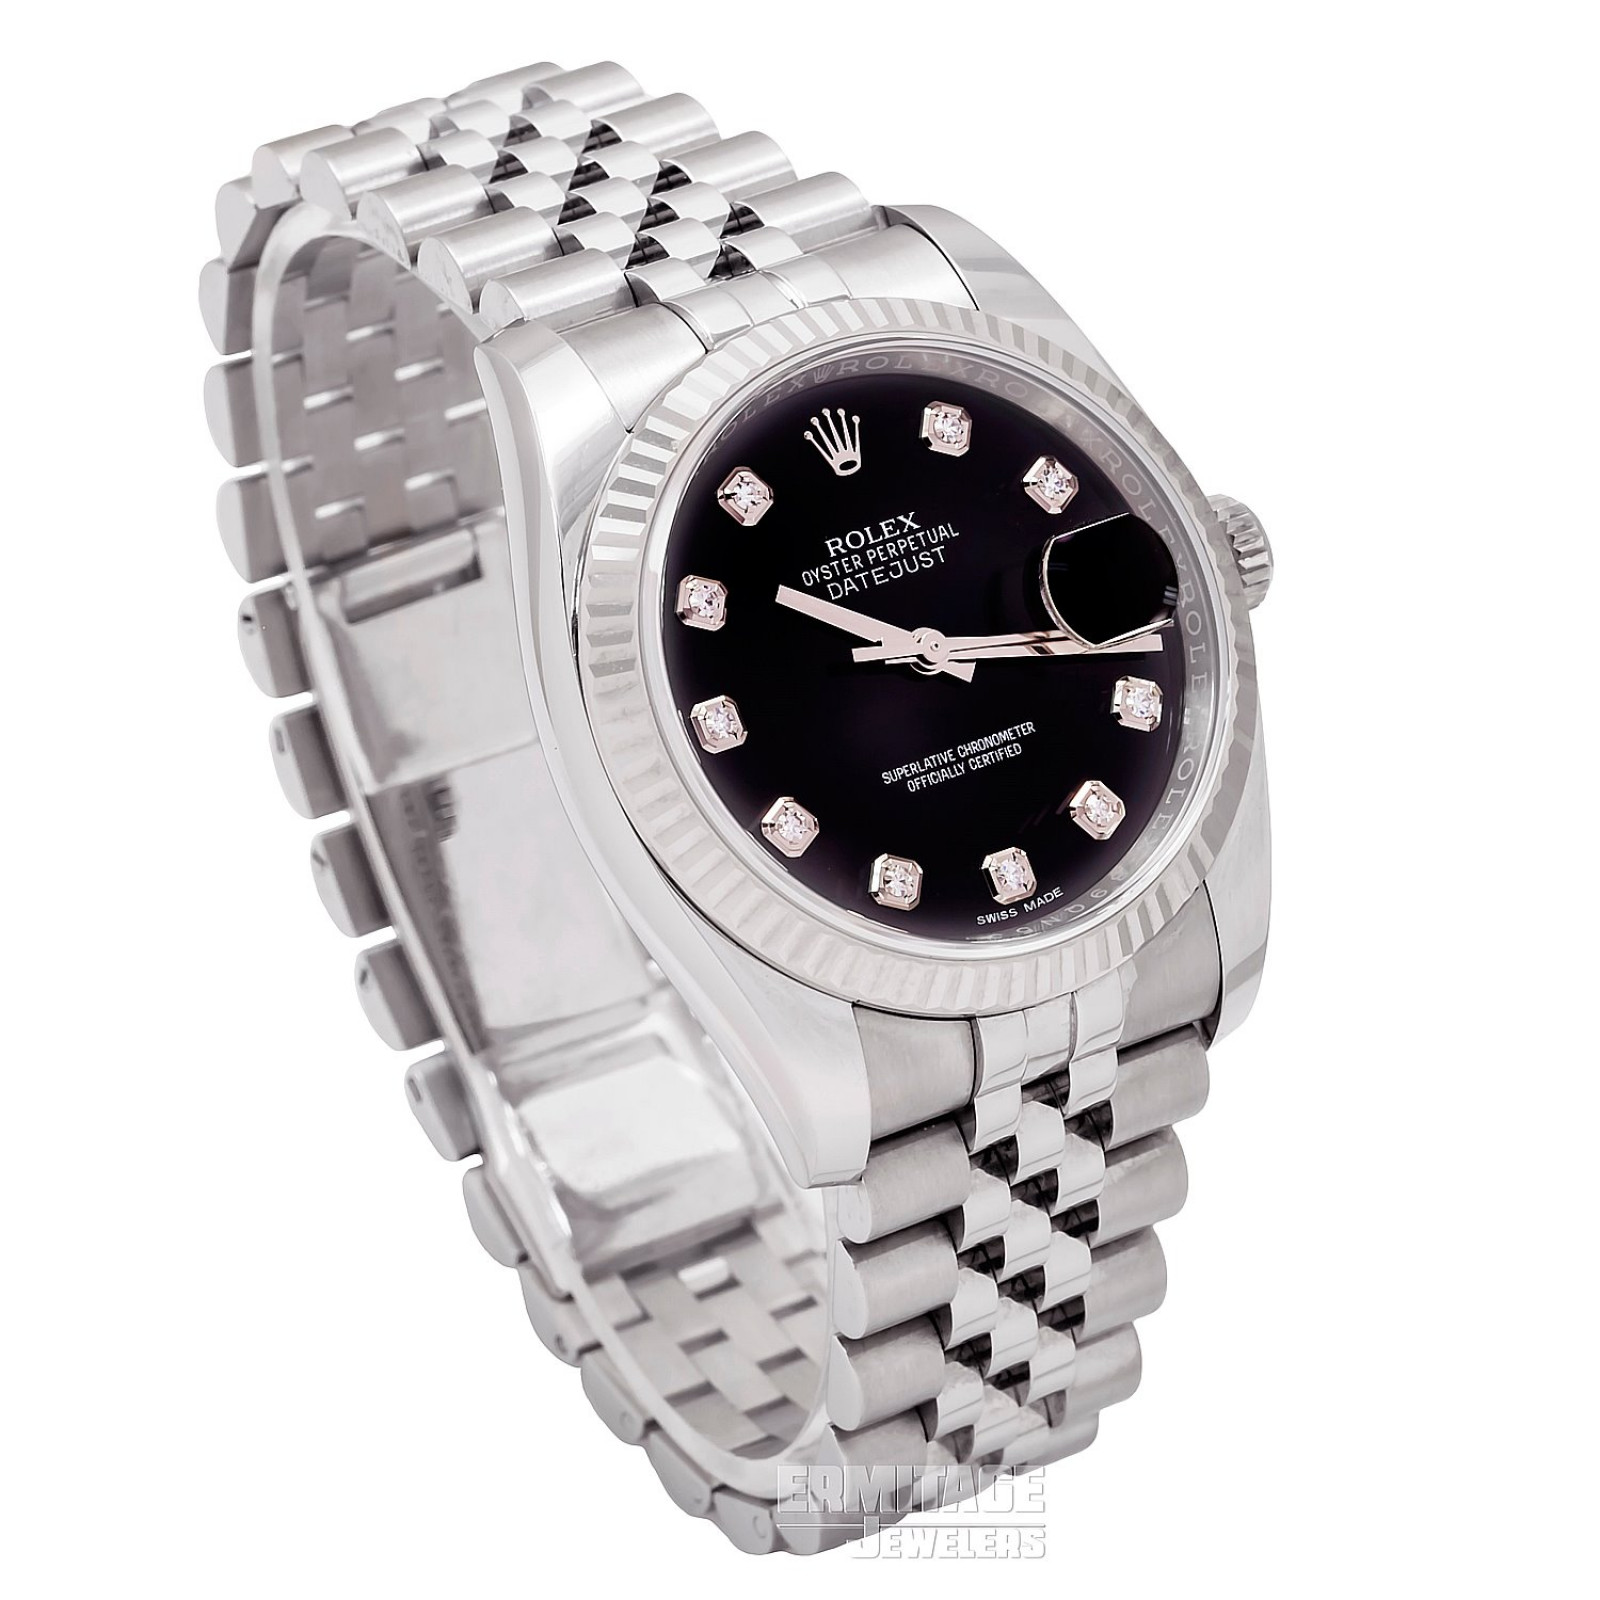 36 mm Rolex Datejust 116234 White Gold & Steel on Jubilee with Black Dial